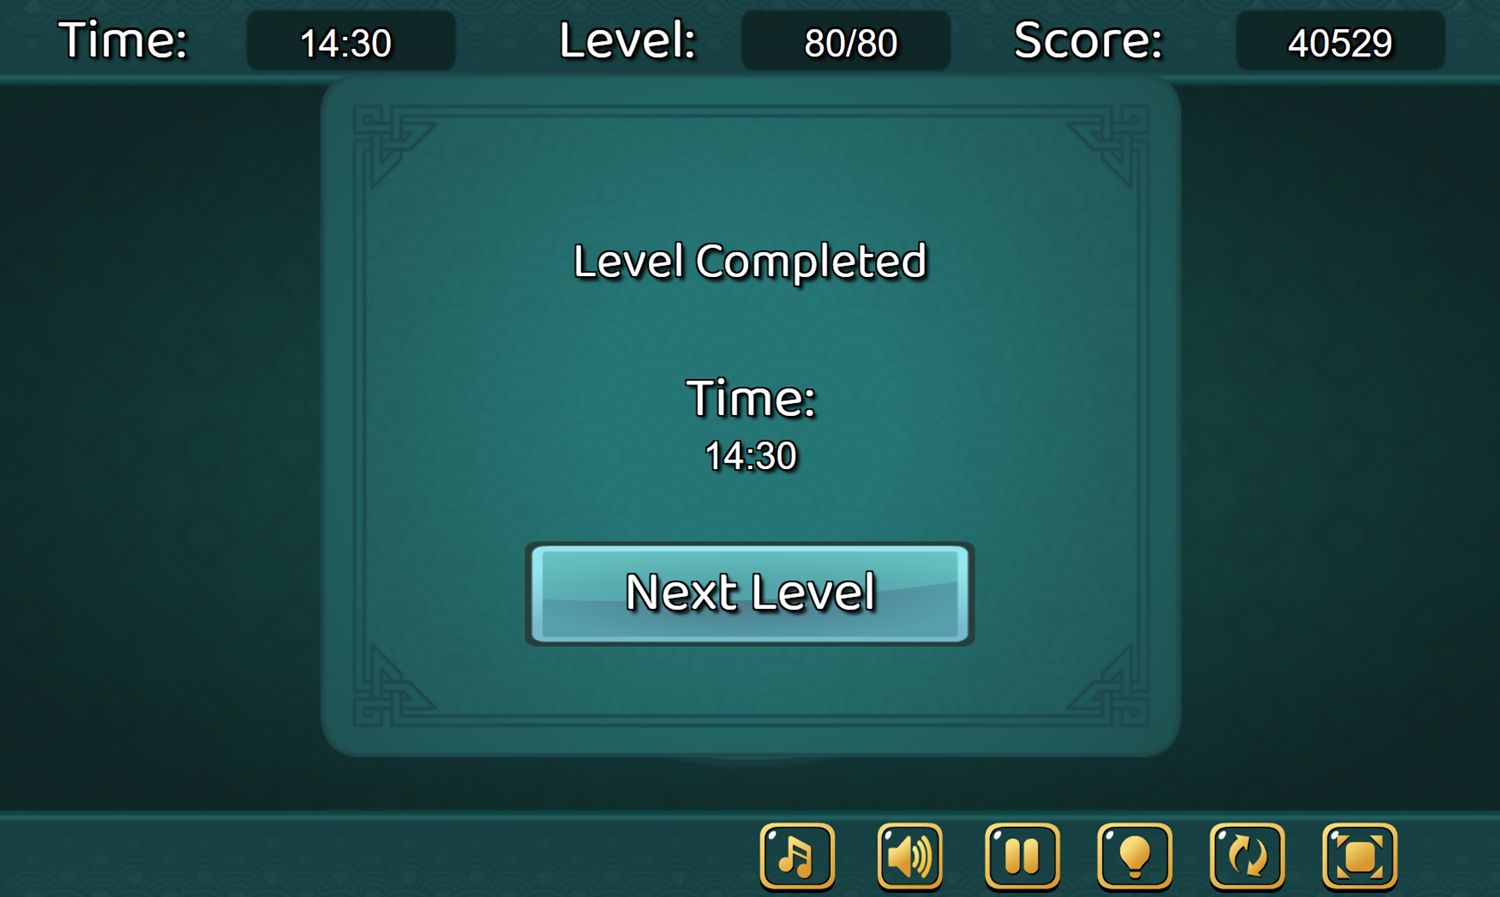 Mahjong Tower Game Final Level Completed Screenshot.